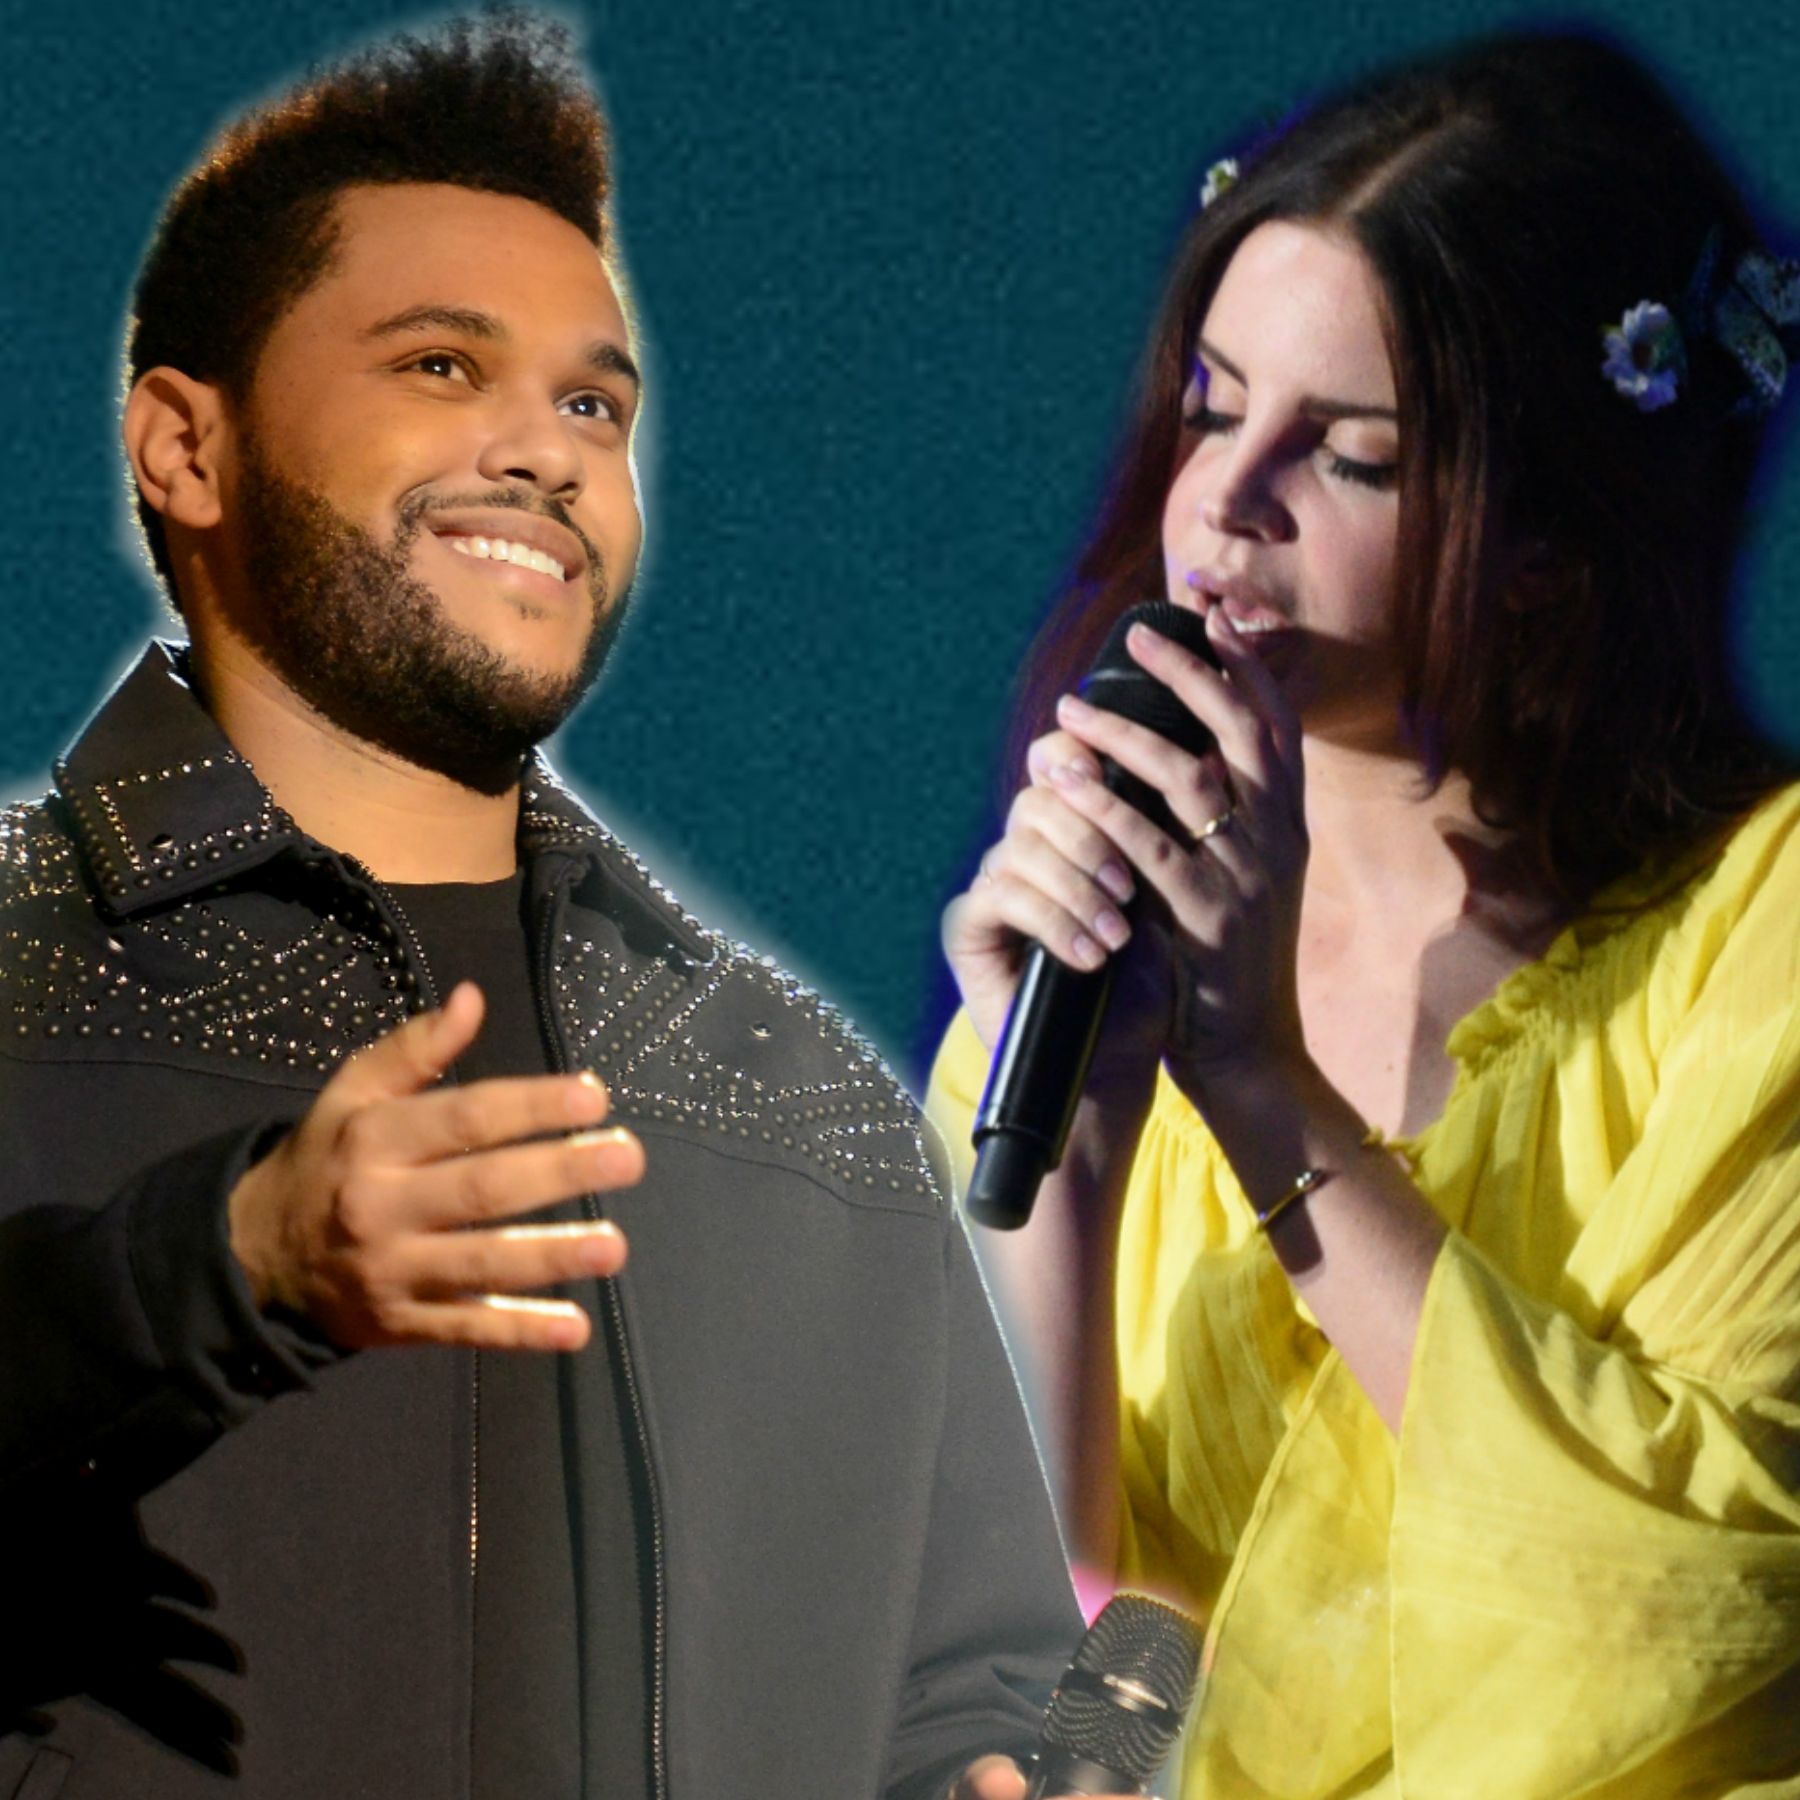 The Weeknd and Lana Del Rey's live shows emphasize their kindred